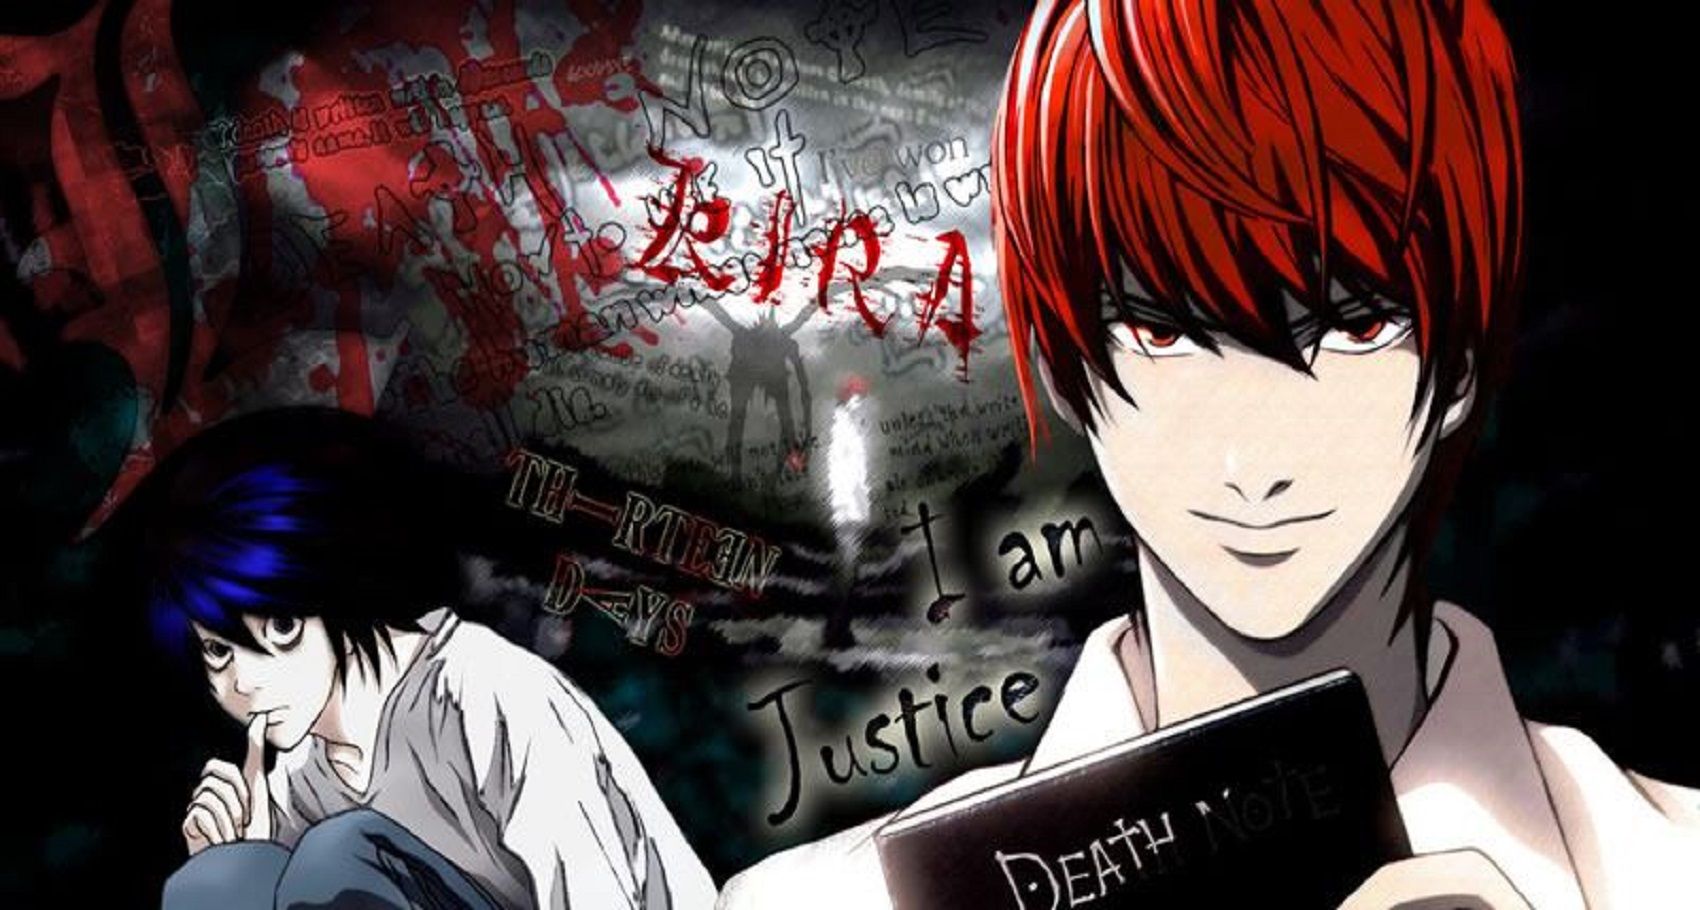 Every Death Note Episode, Ranked. From a logistical standpoint, ranking… |  by Sean Mott | Medium